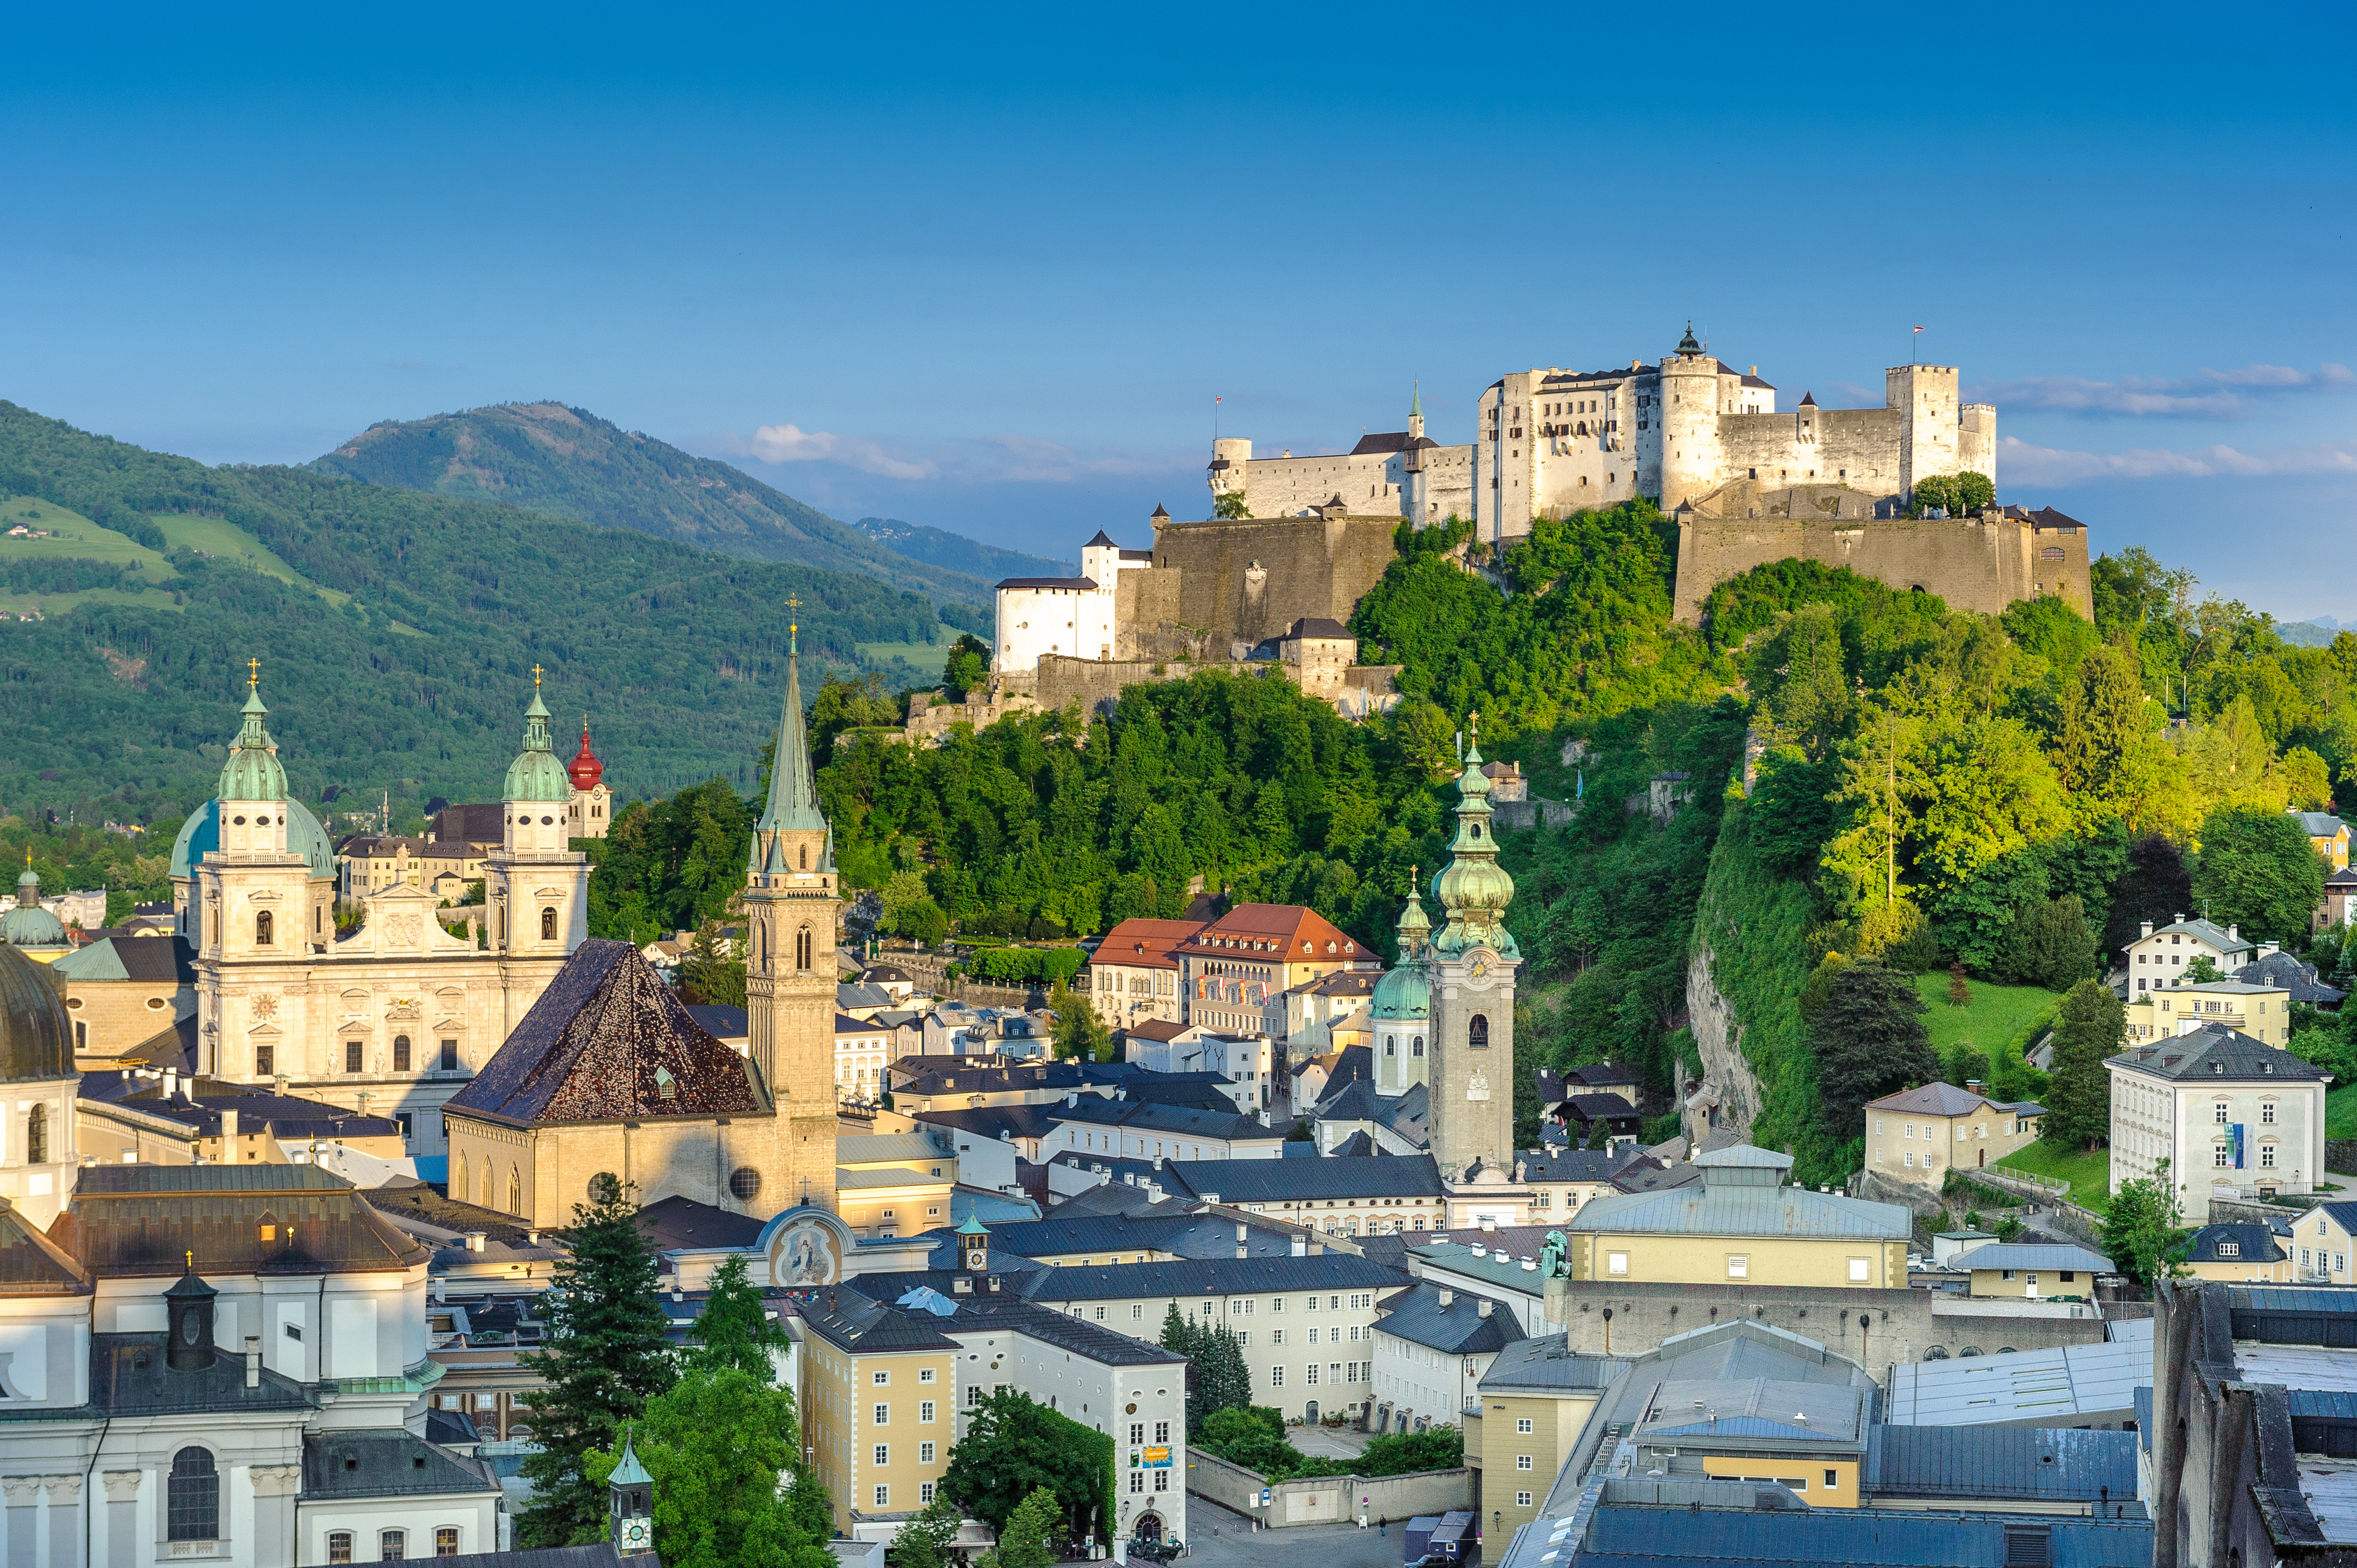 View of Hohensalzburg Fortress and Salzburg's old town